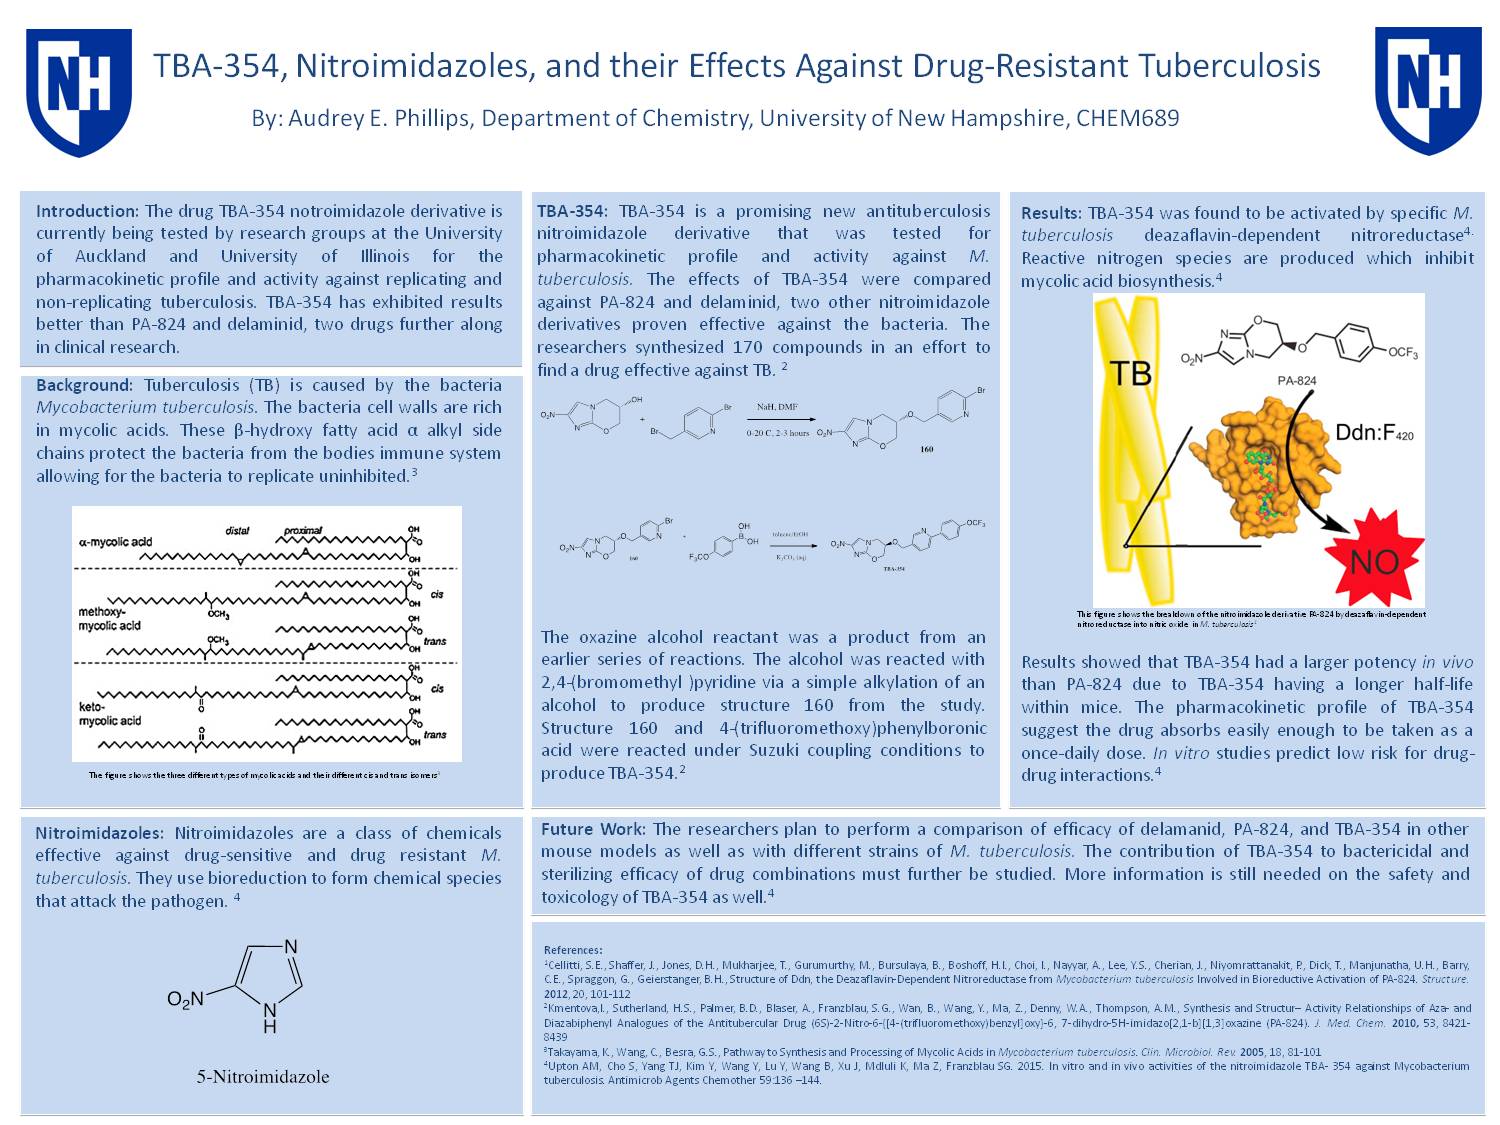 Tba-354, Nitroimidazoles, And Their Effects Against Drug-Resistant Tuberculosis by aer76